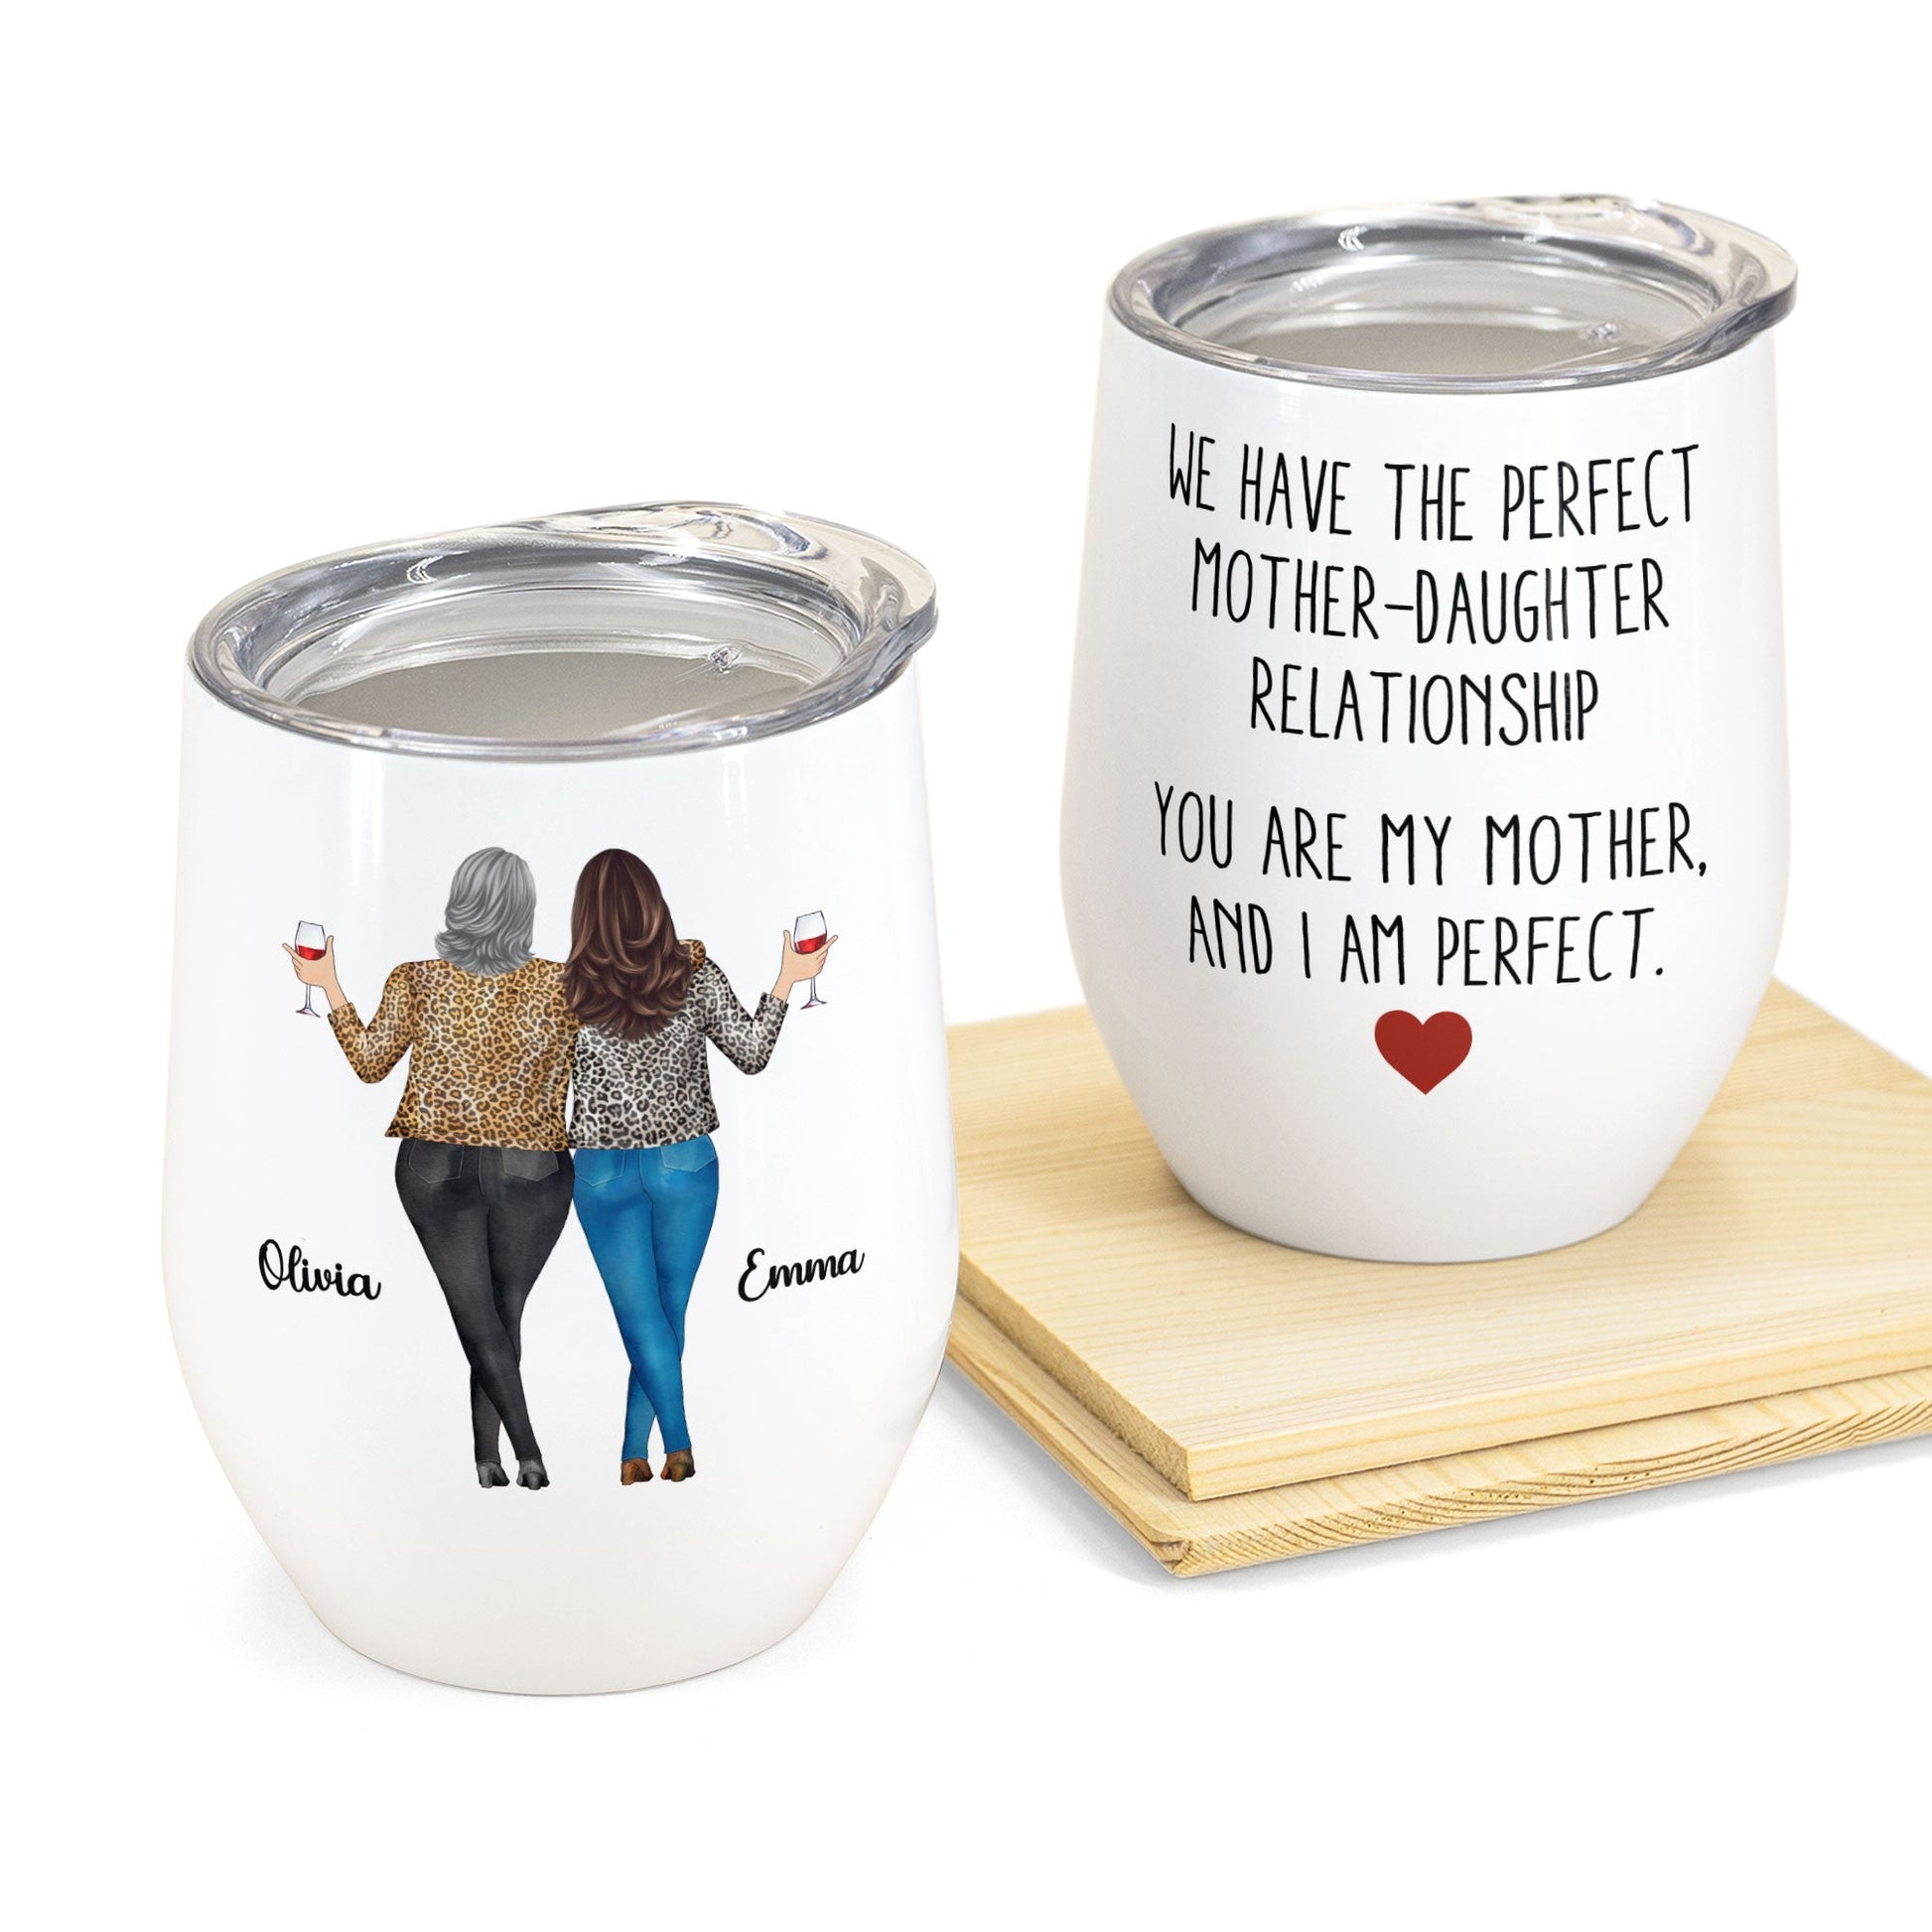 Behind Every Crazy Daughter Cool Mom Personalized Wine Tumbler